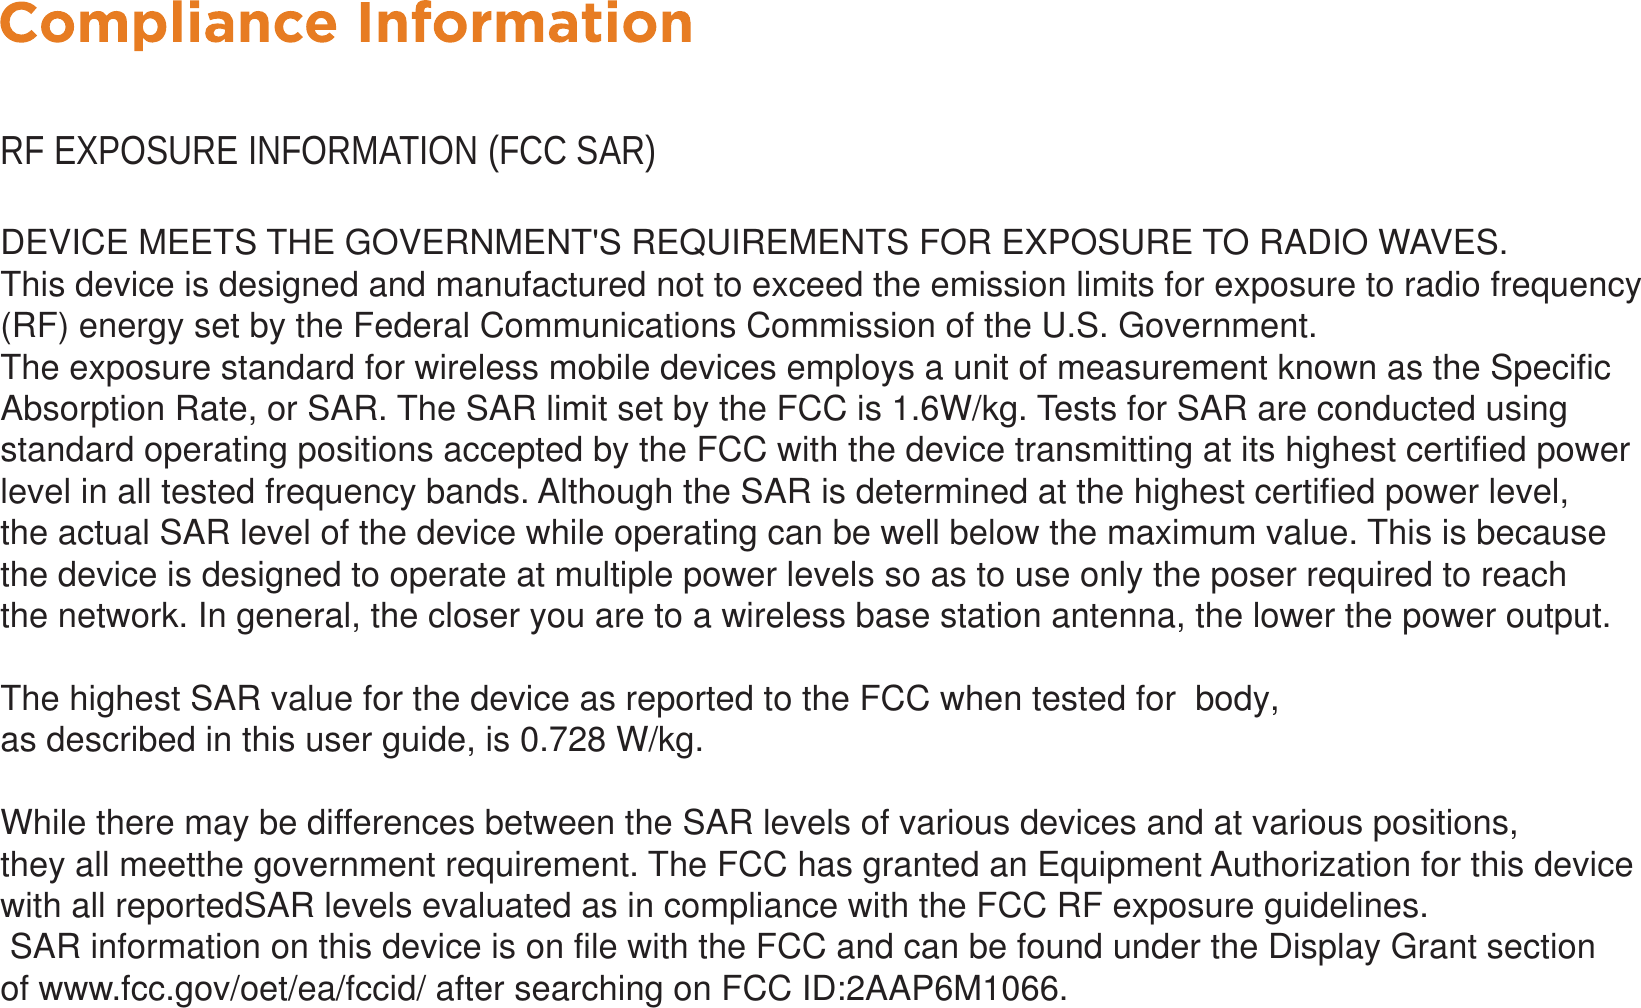 RF EXPOSURE INFORMATION (FCC SAR)DEVICE MEETS THE GOVERNMENT&apos;S REQUIREMENTS FOR EXPOSURE TO RADIO WAVES.This device is designed and manufactured not to exceed the emission limits for exposure to radio frequency (RF) energy set by the Federal Communications Commission of the U.S. Government.The exposure standard for wireless mobile devices employs a unit of measurement known as the Specific Absorption Rate, or SAR. The SAR limit set by the FCC is 1.6W/kg. Tests for SAR are conducted using standard operating positions accepted by the FCC with the device transmitting at its highest certified power level in all tested frequency bands. Although the SAR is determined at the highest certified power level, the actual SAR level of the device while operating can be well below the maximum value. This is because the device is designed to operate at multiple power levels so as to use only the poser required to reach the network. In general, the closer you are to a wireless base station antenna, the lower the power output.The highest SAR value for the device as reported to the FCC when tested for  body,as described in this user guide, is 0.728 W/kg.  While there may be differences between the SAR levels of various devices and at various positions, they all meetthe government requirement. The FCC has granted an Equipment Authorization for this device with all reportedSAR levels evaluated as in compliance with the FCC RF exposure guidelines. SAR information on this device is on file with the FCC and can be found under the Display Grant section of www.fcc.gov/oet/ea/fccid/ after searching on FCC ID:2AAP6M1066.